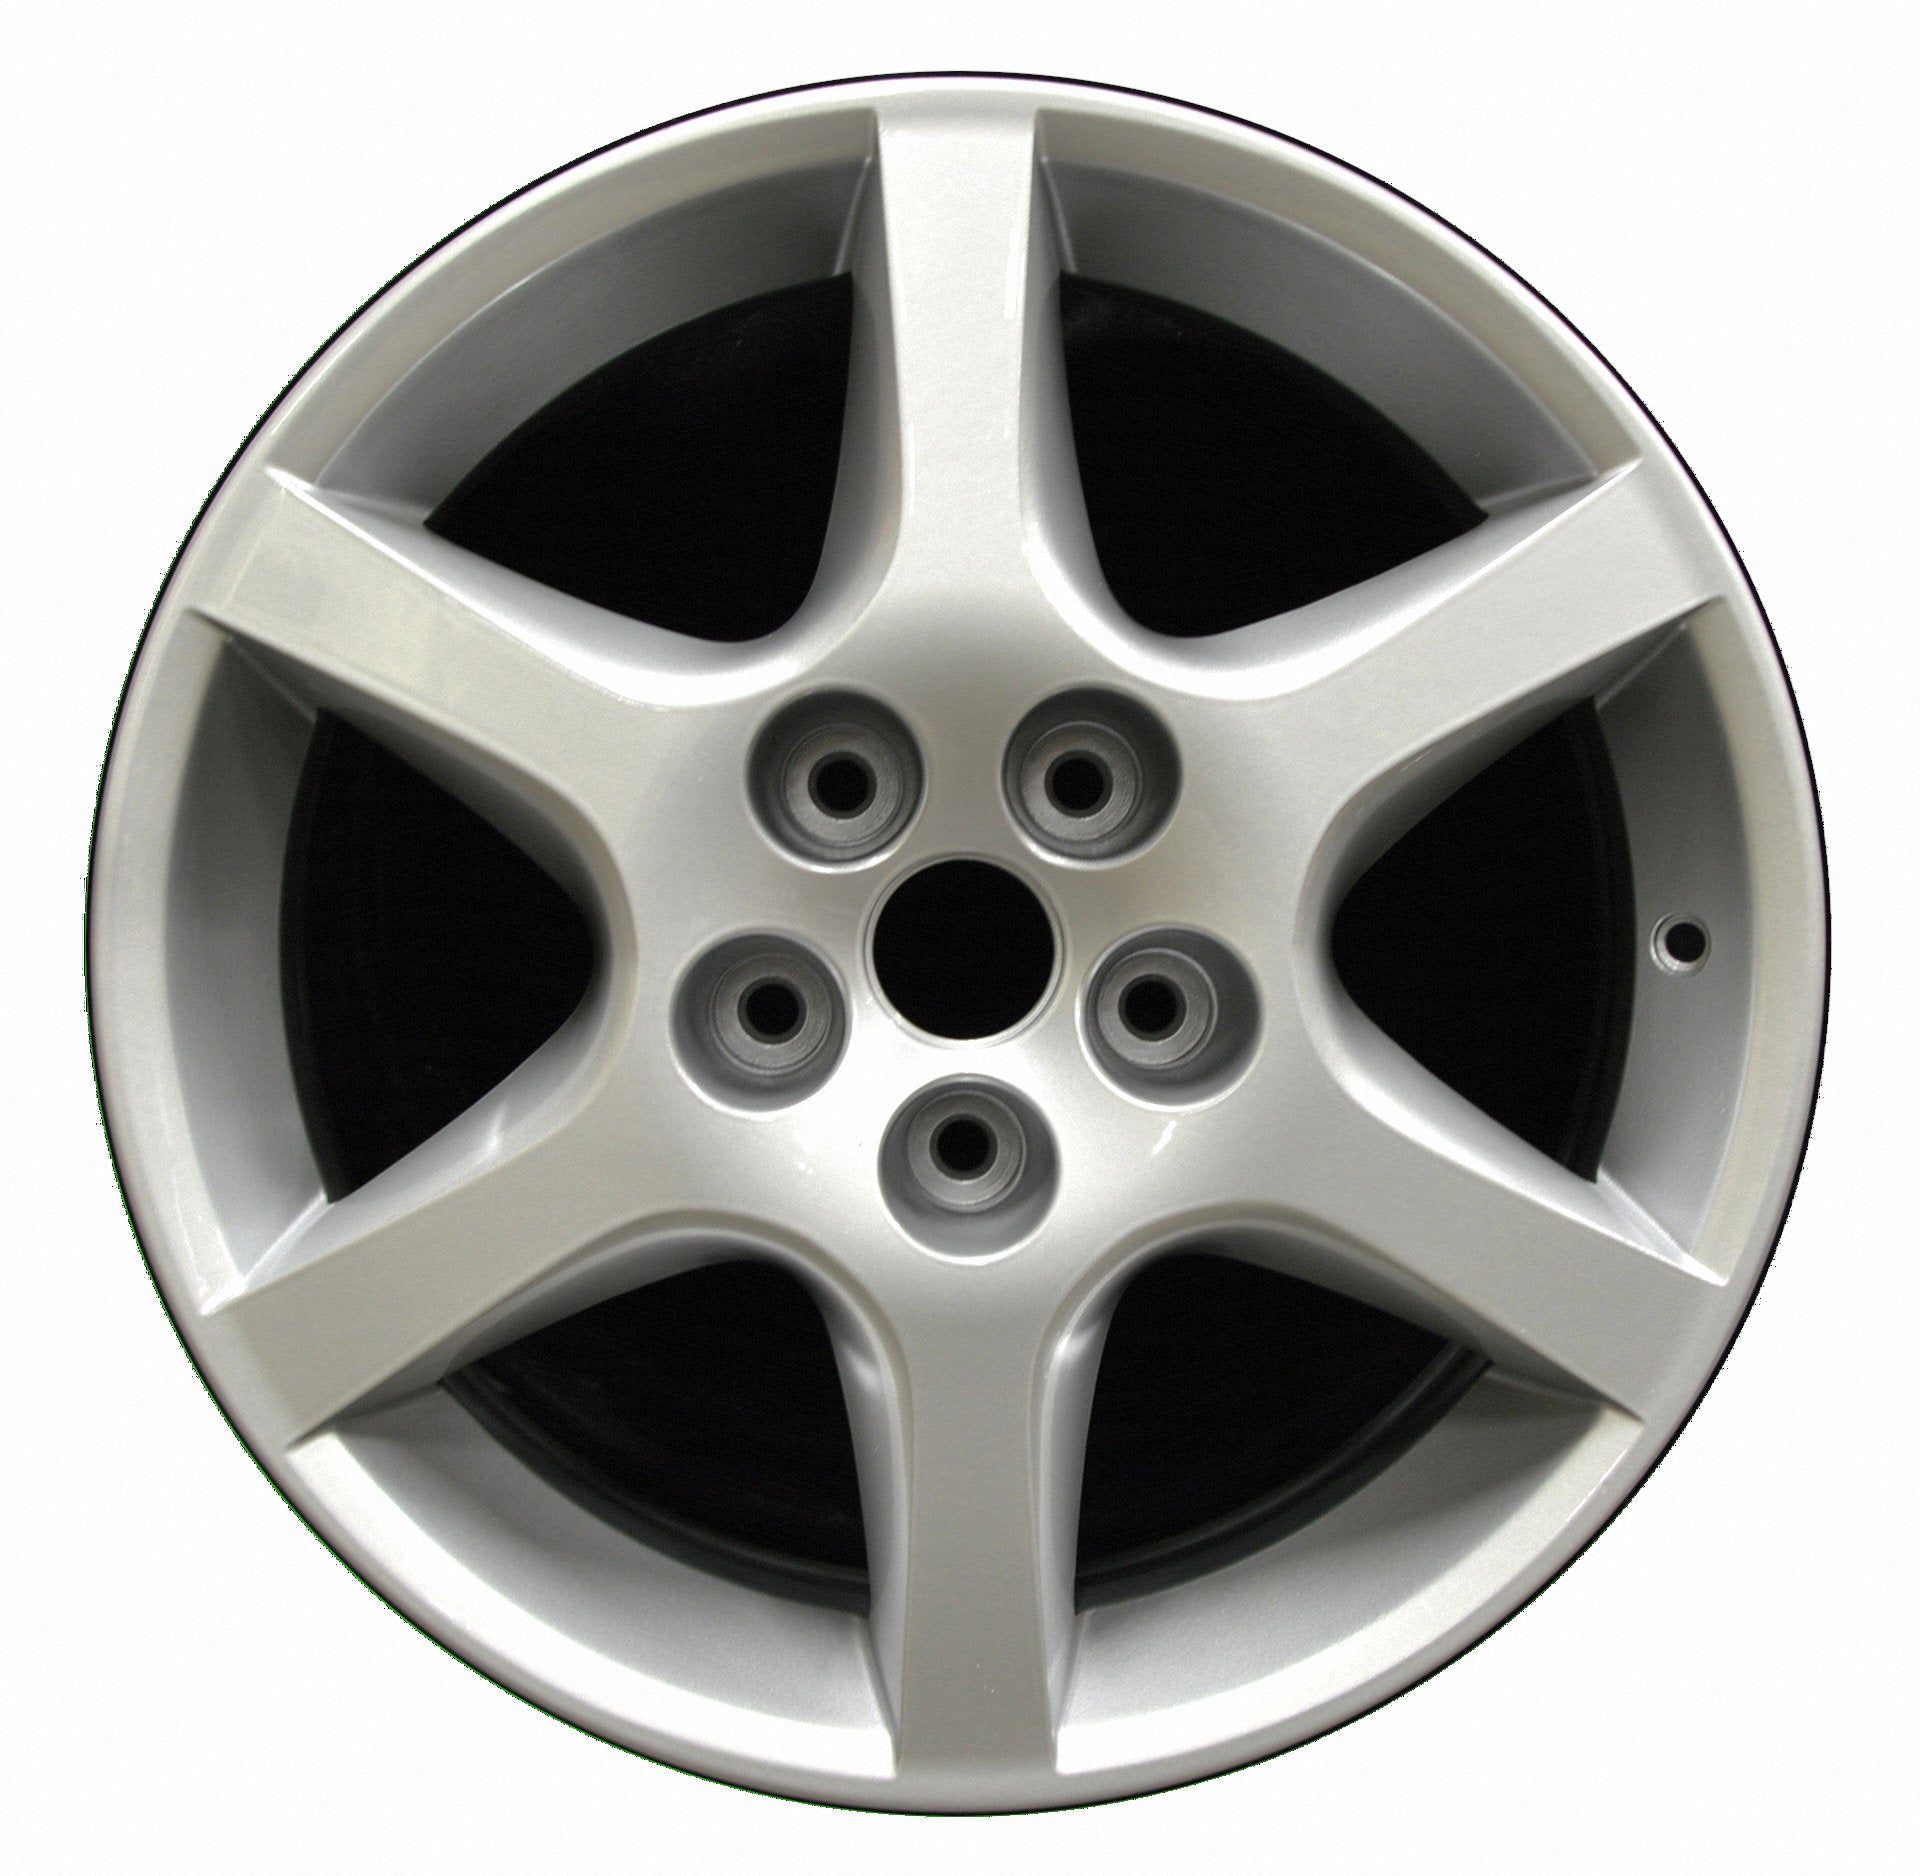 Nissan Altima  2002, 2003, 2004 Factory OEM Car Wheel Size 17x7 Alloy WAO.62398.PS07.FF